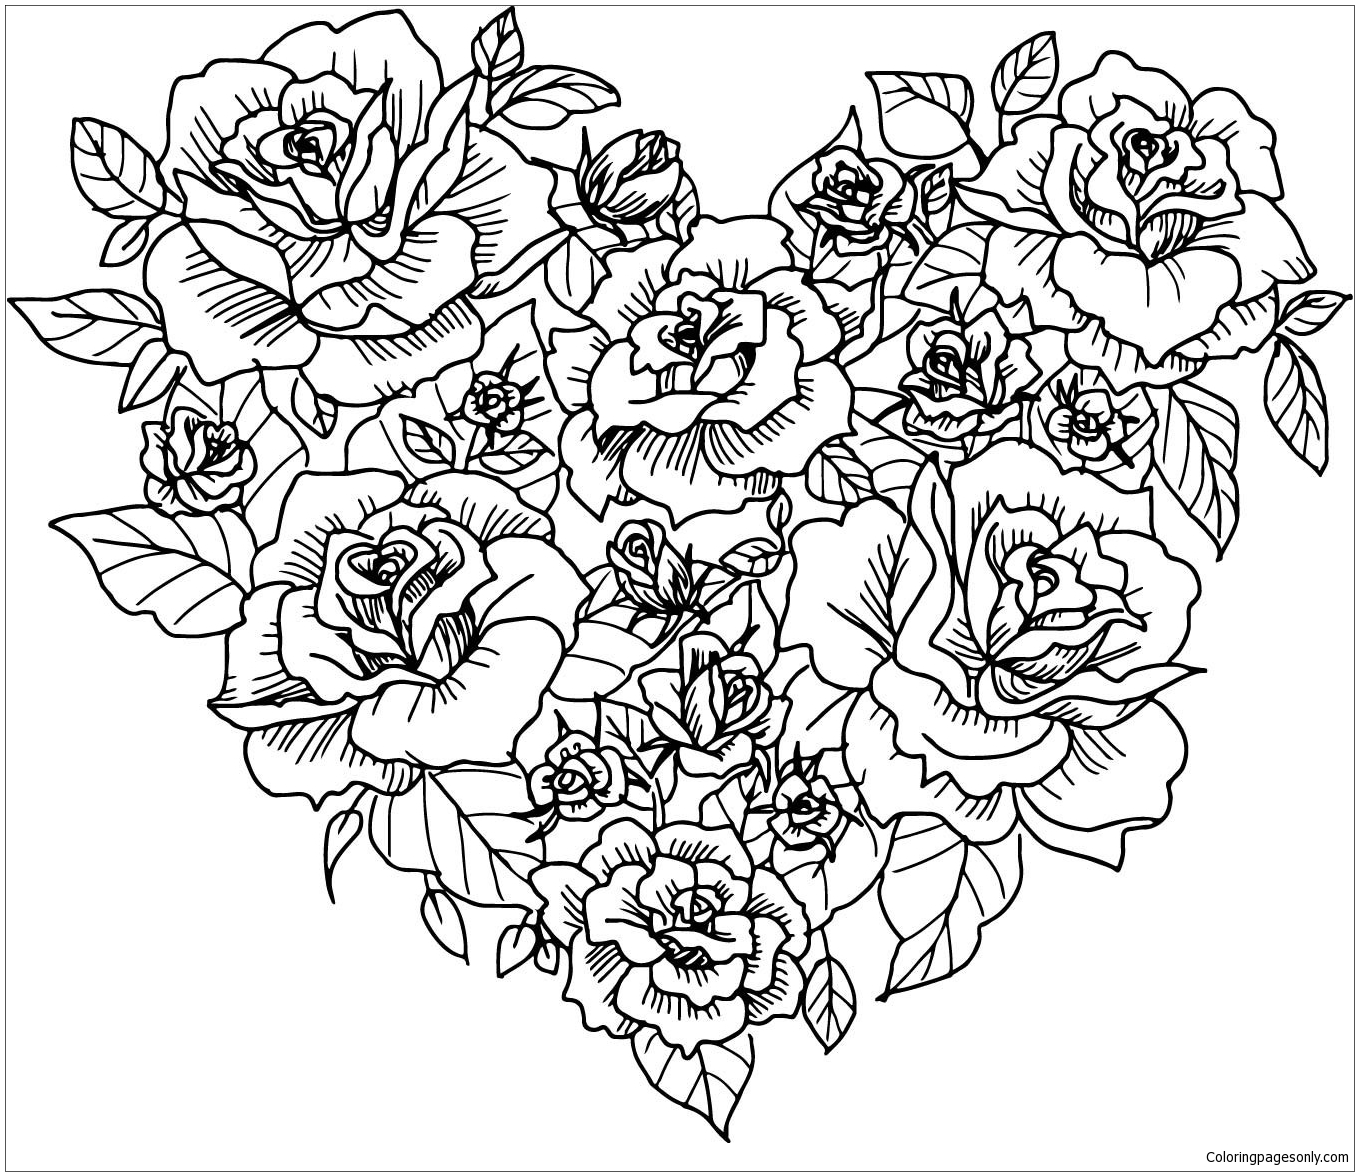 Heart With Flowers Coloring Page   Free Coloring Pages Online ...